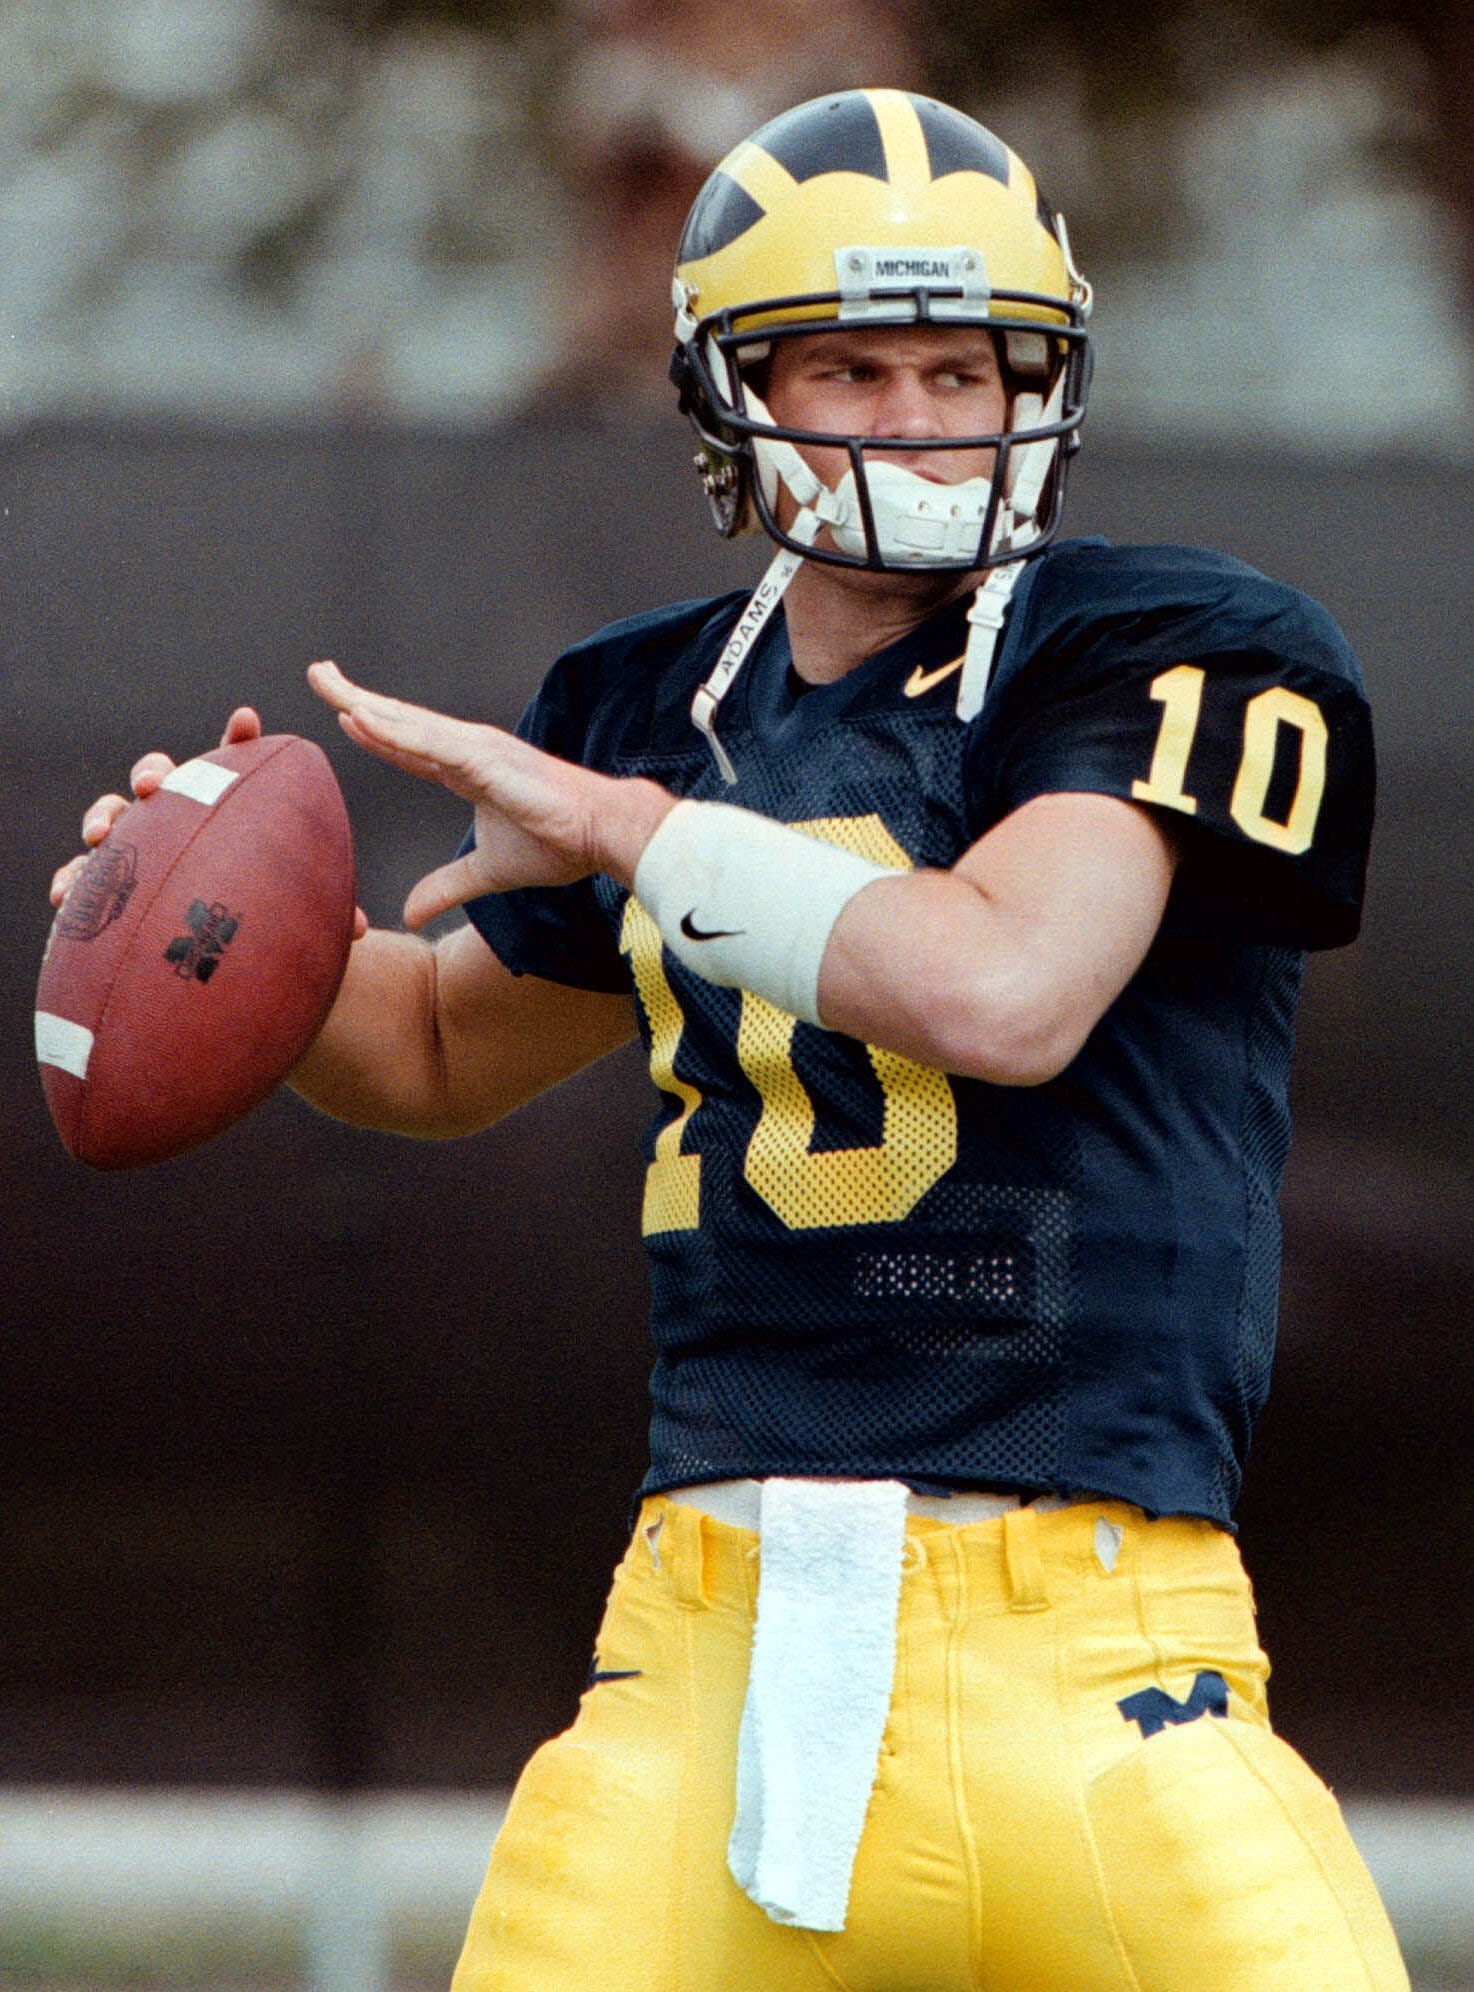 Seen before the Citrus Bowl in Orlando on Dec. 26, 1998, Tom Brady played for Michigan from 1996-99, going 20-5 as a starter.